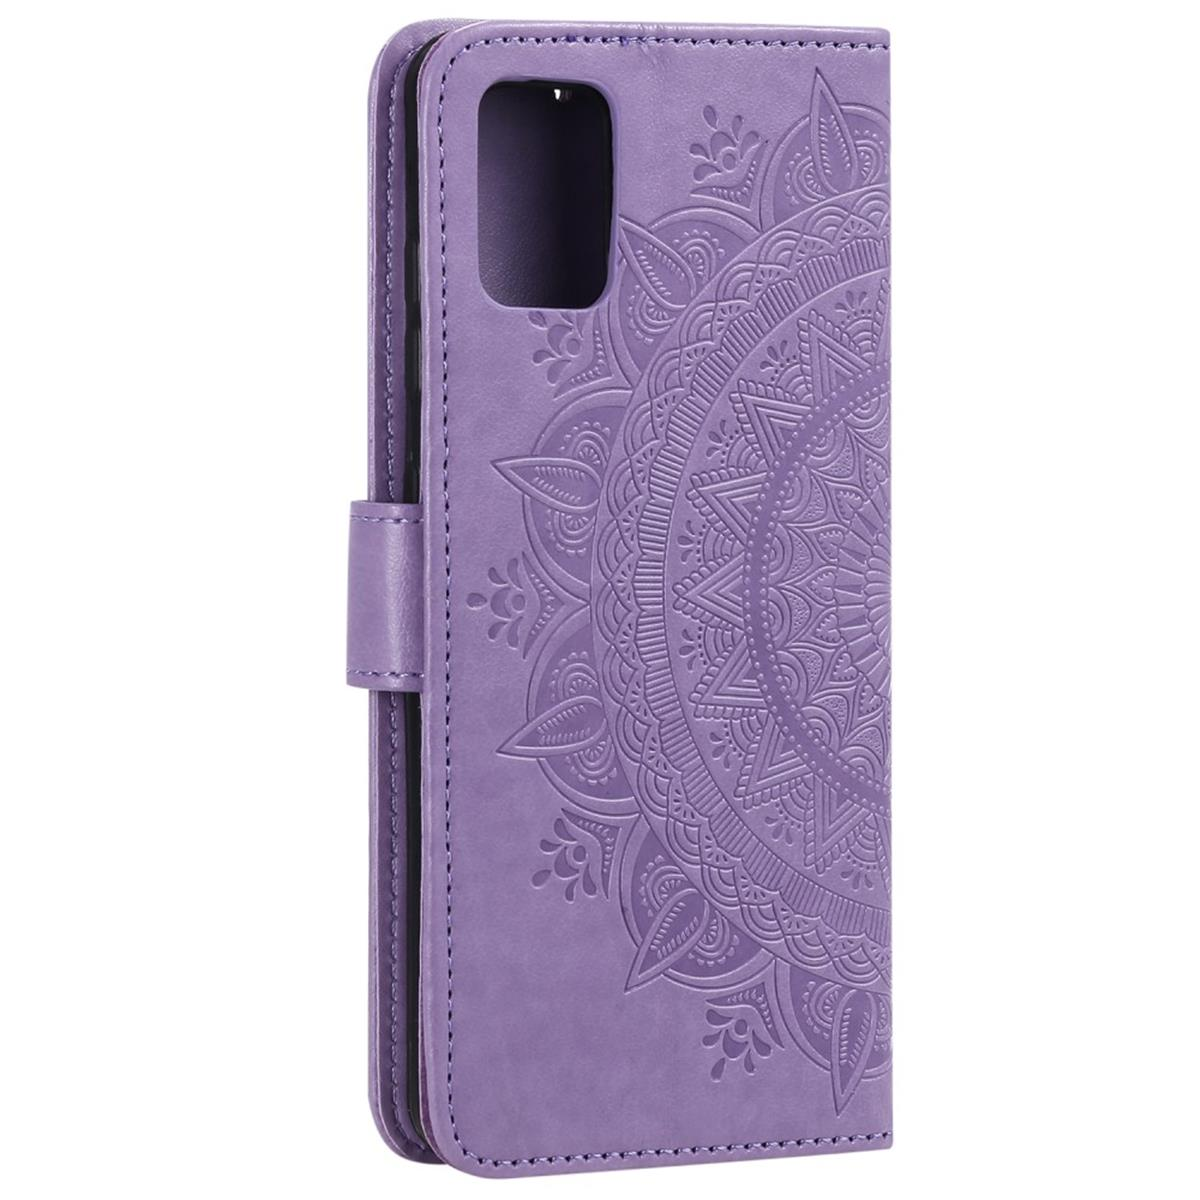 COVERKINGZ Klapphülle mit Mandala Muster, Bookcover, Galaxy Samsung, A51, Lila